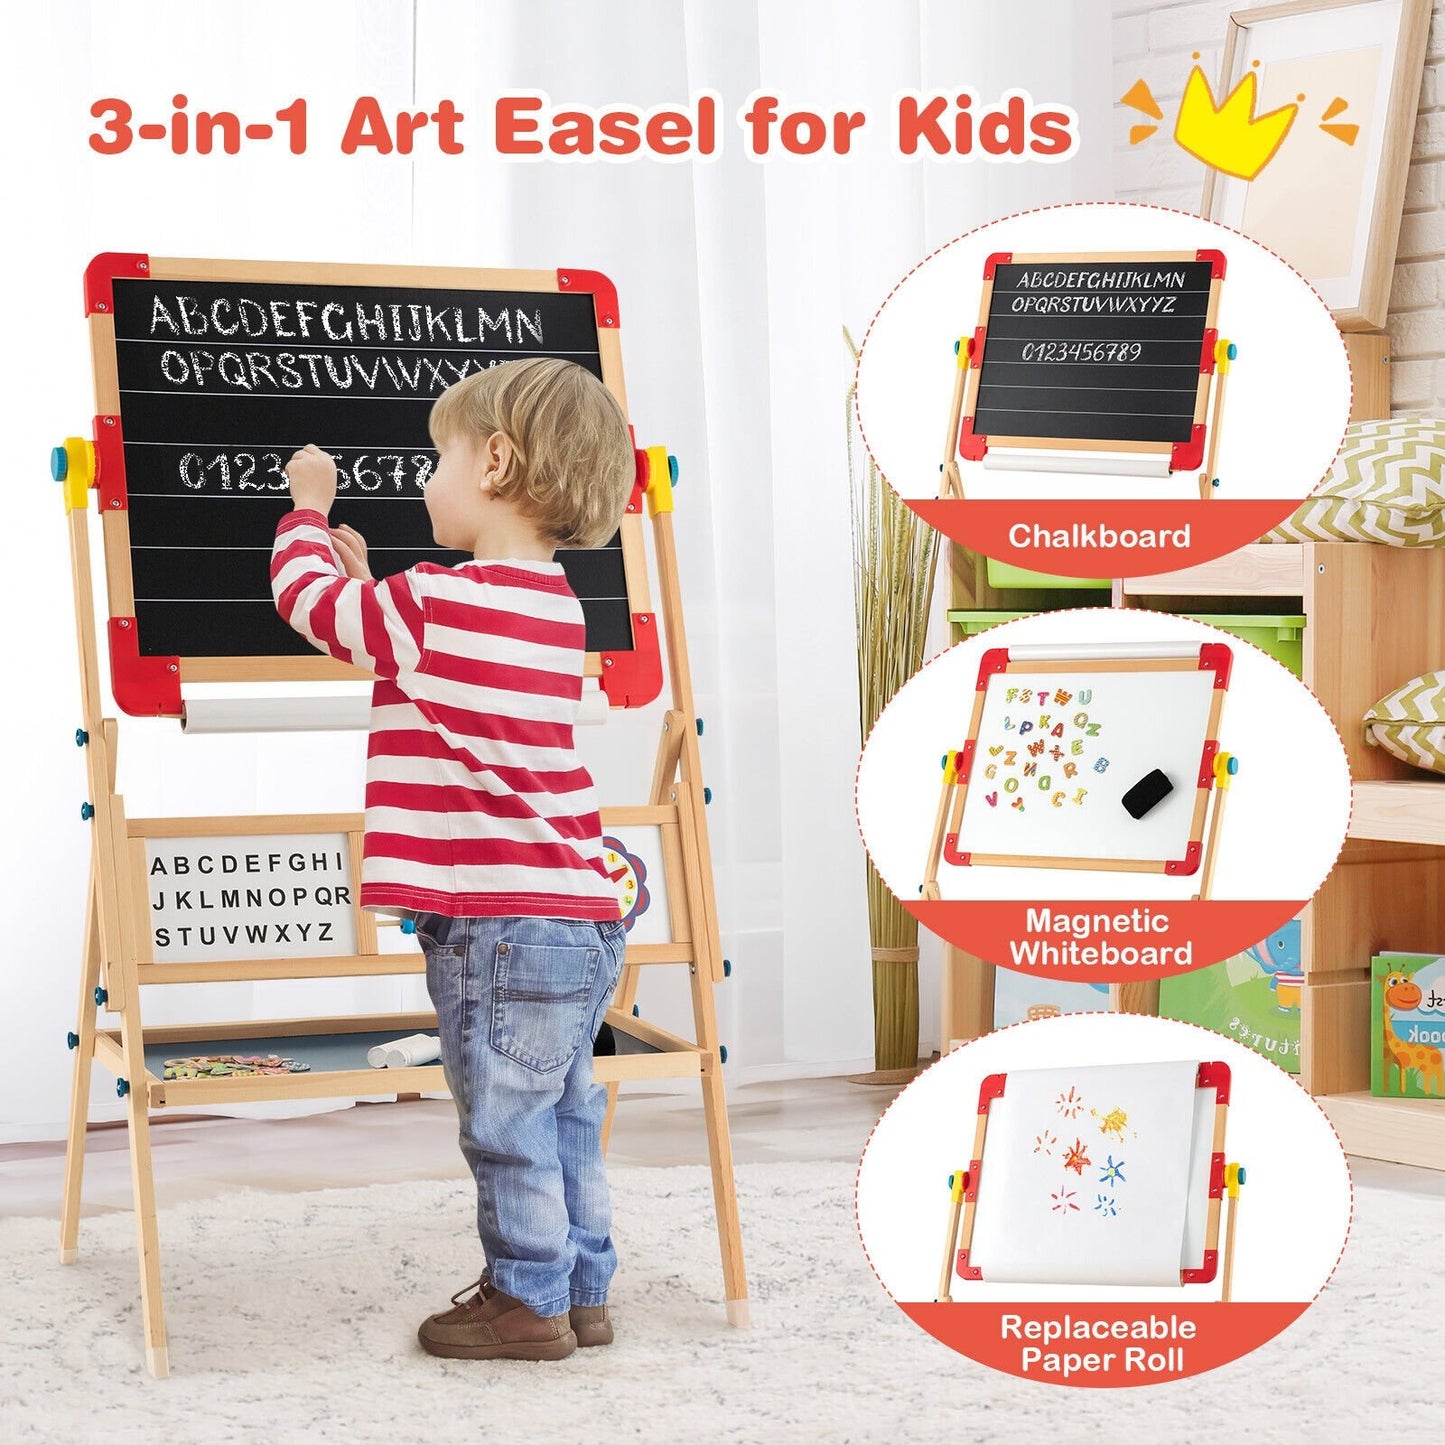 3-in-1 Wooden Art Easel for Kids with Drawing Paper Roll, Multicolor